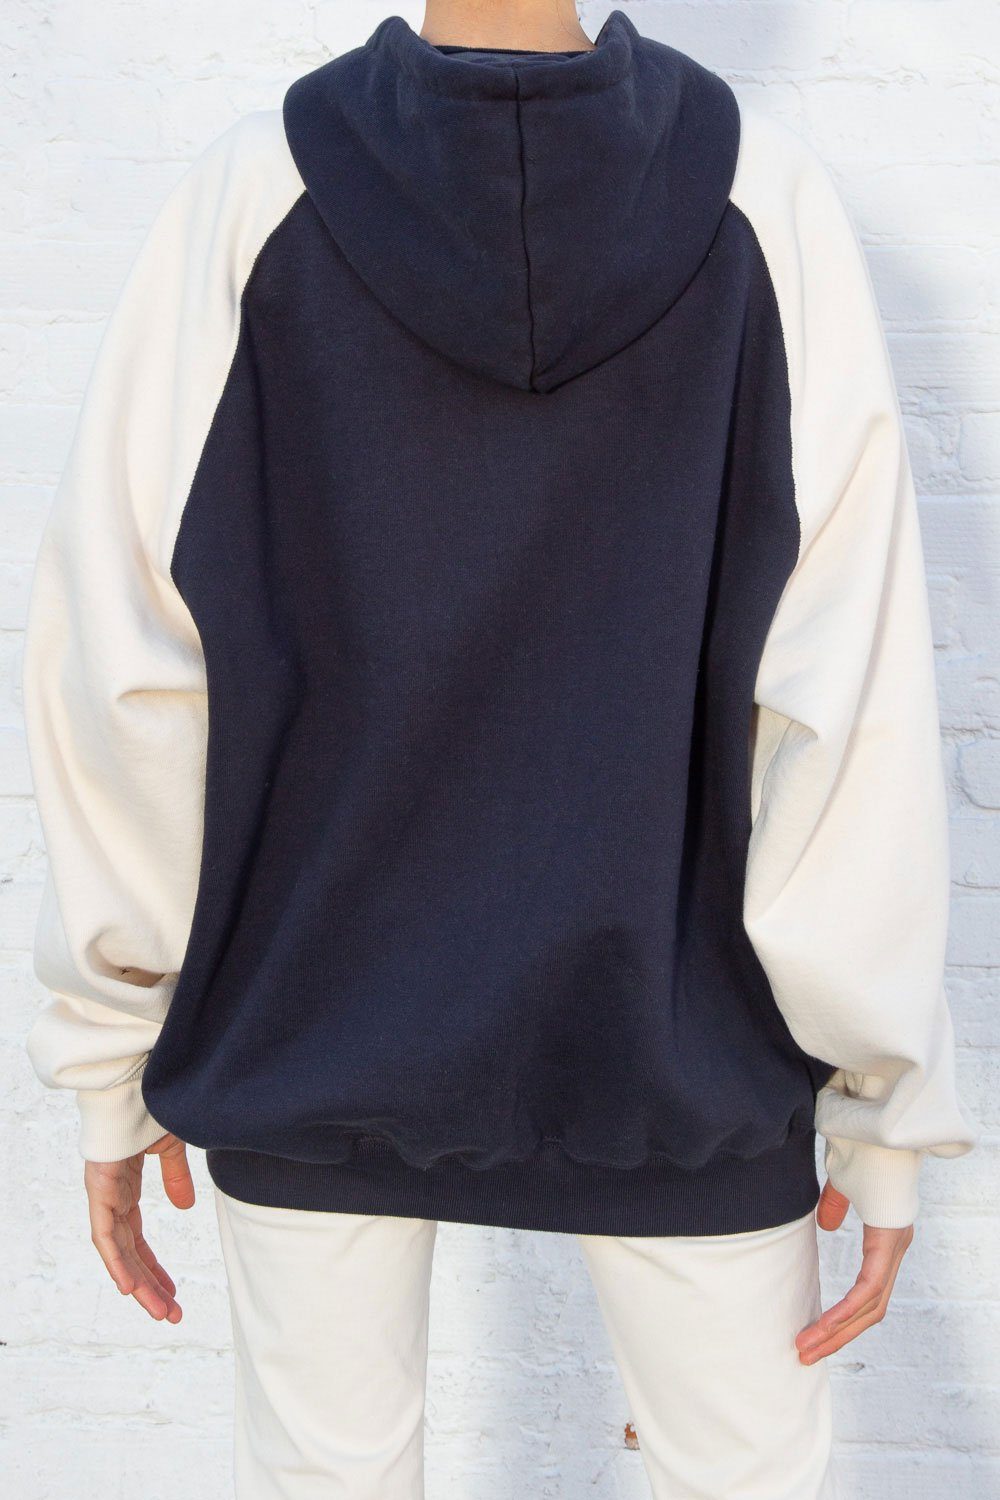 Ivory And Navy Blue / Oversized Fit